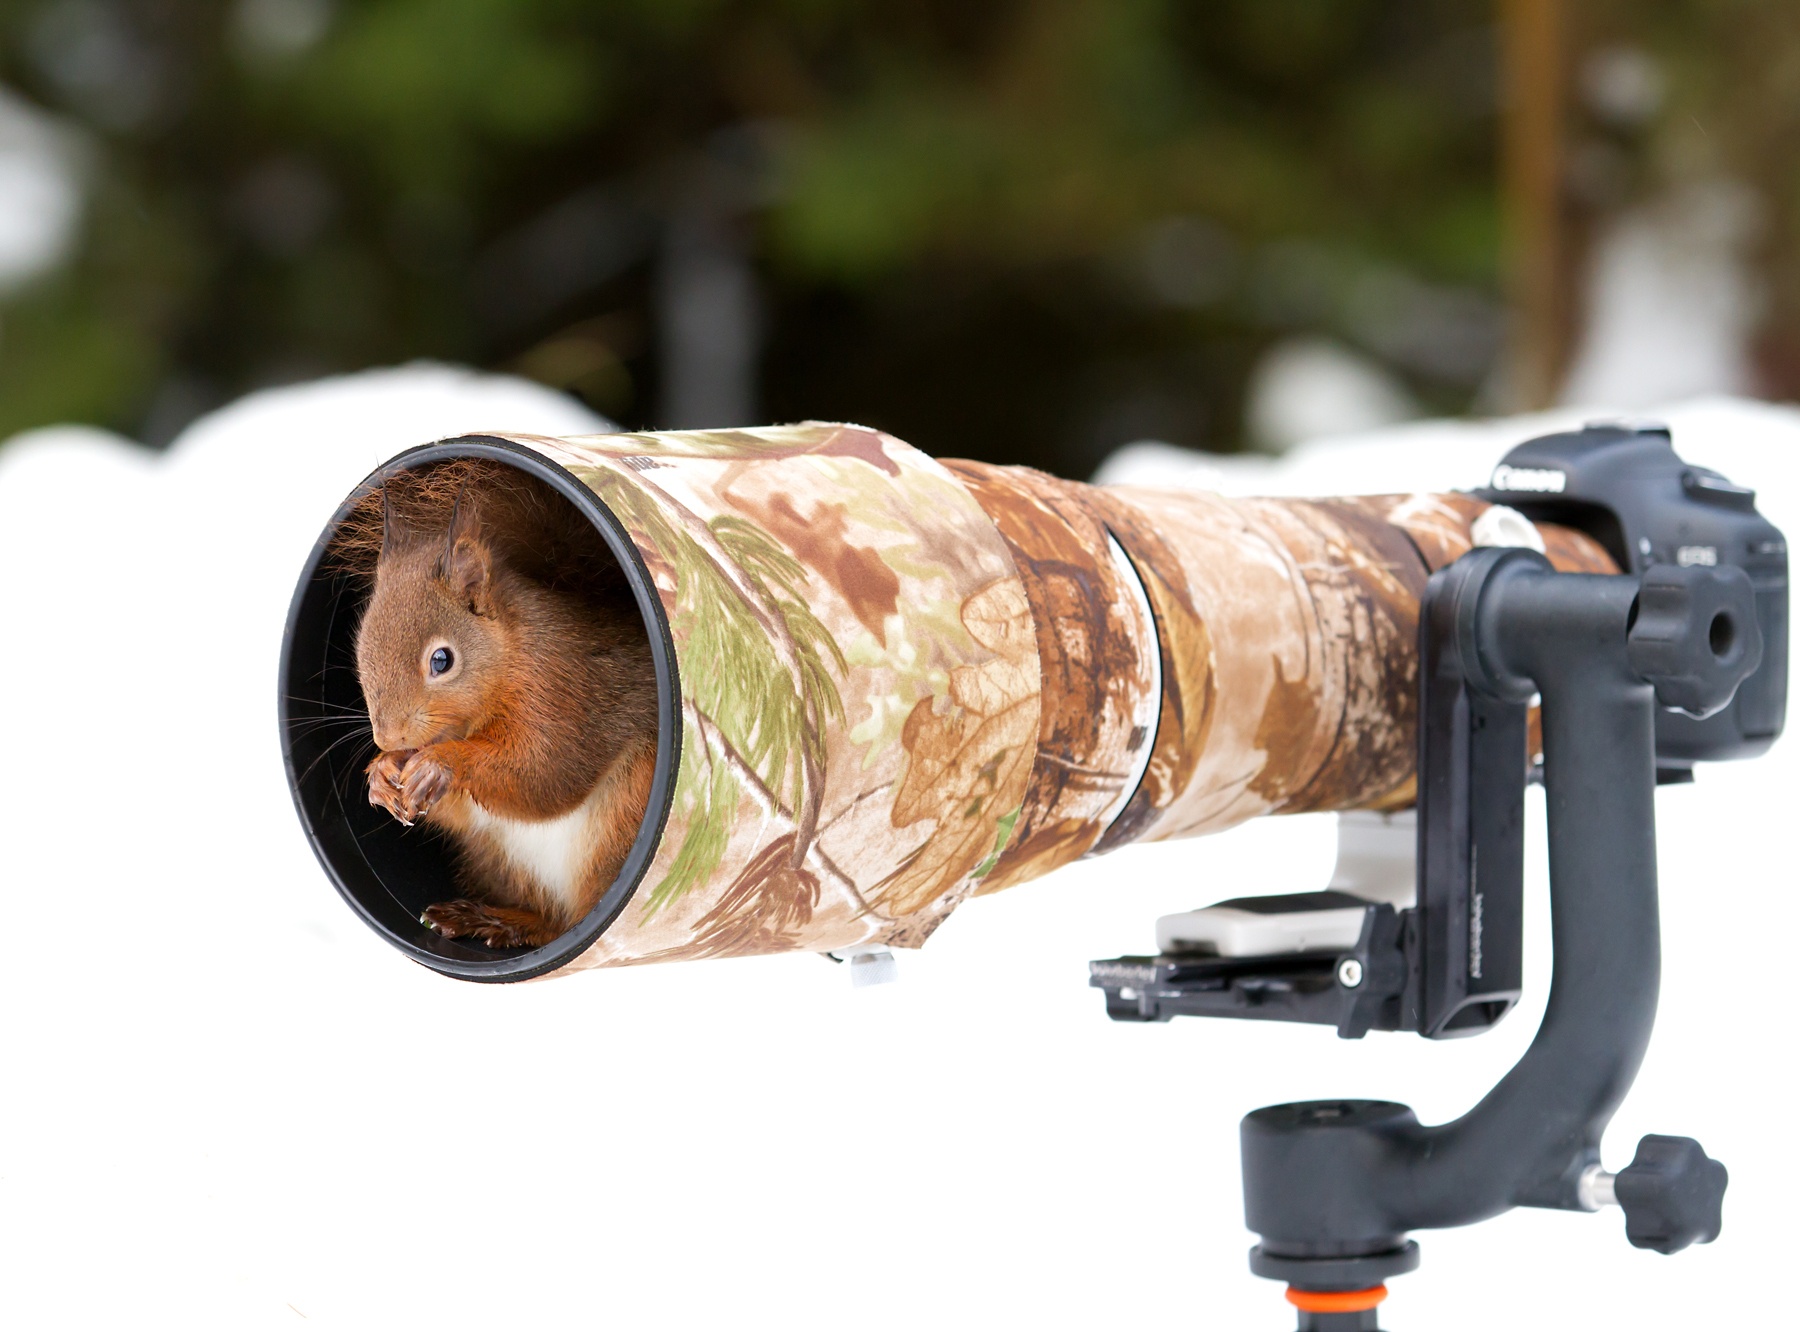 Literal Wildlife Photographers: 19 Photos of Animals Getting Cozy with Camera Gear